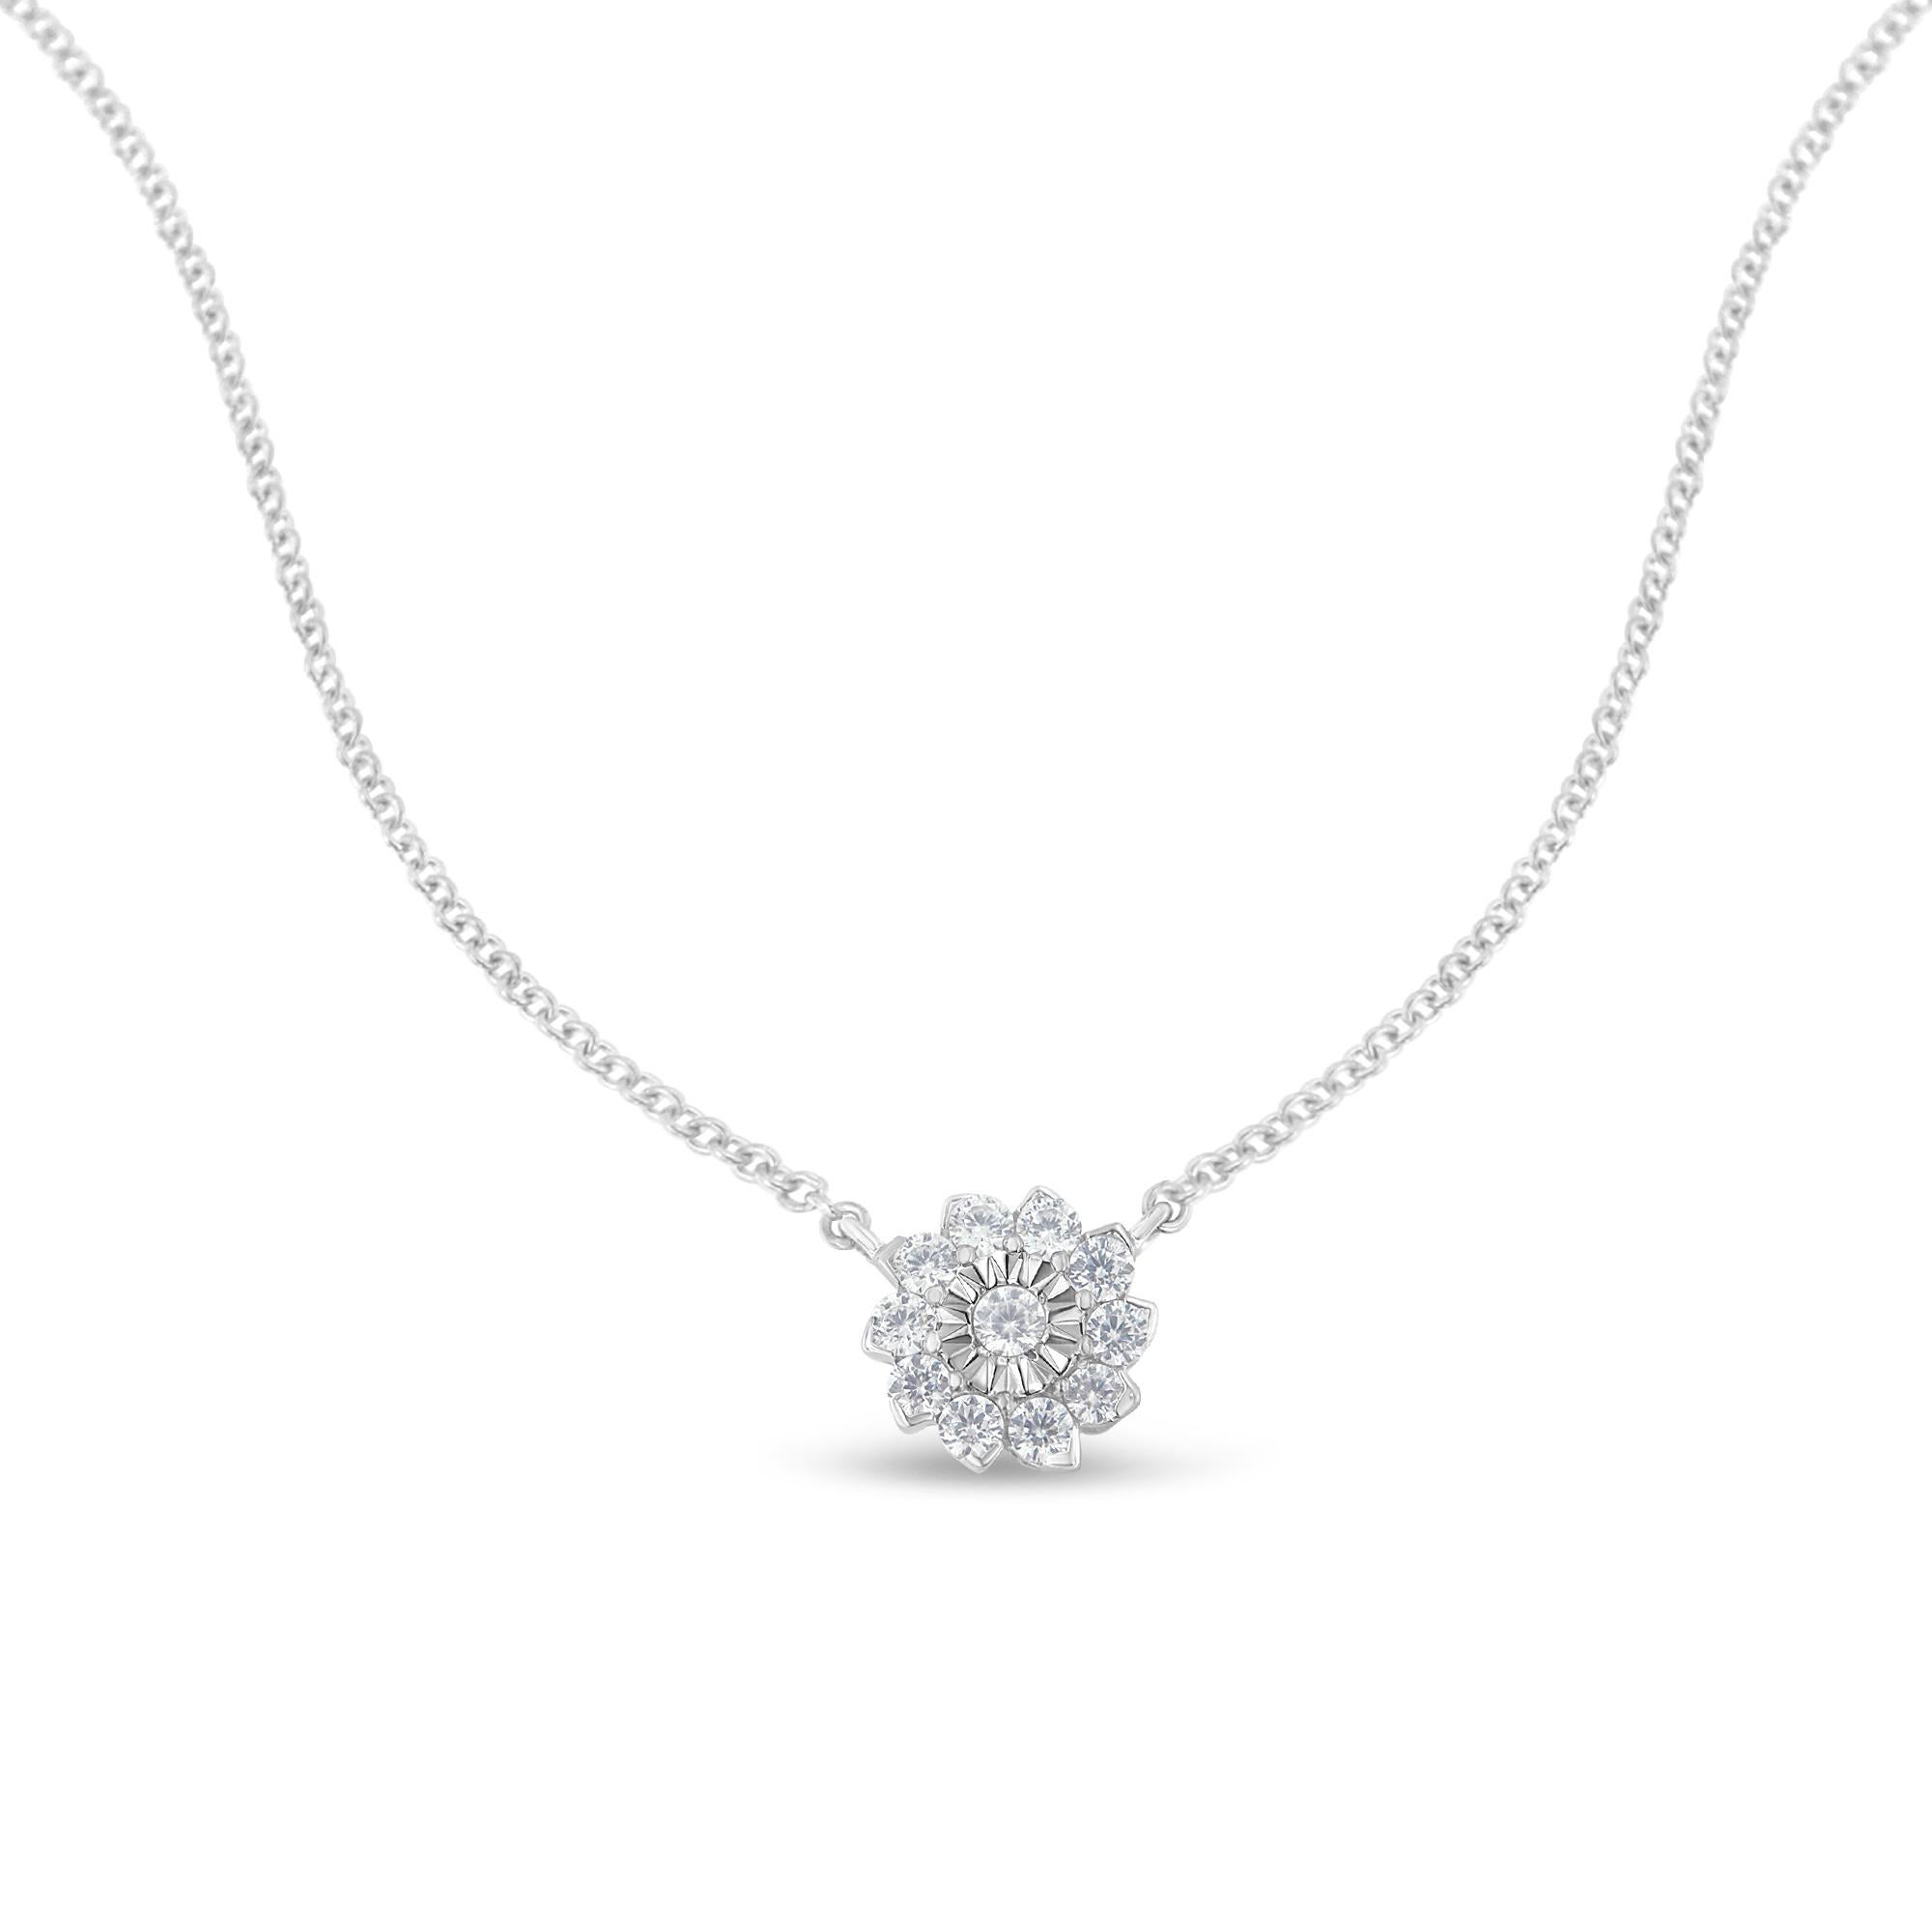 This dazzling diamond floral pendant is fashioned of stunning sterling silver. It features .50CTW of round brilliant diamonds that are clustered together around a single miracle set diamond to form a lovely flower with a grand look. This pendant is